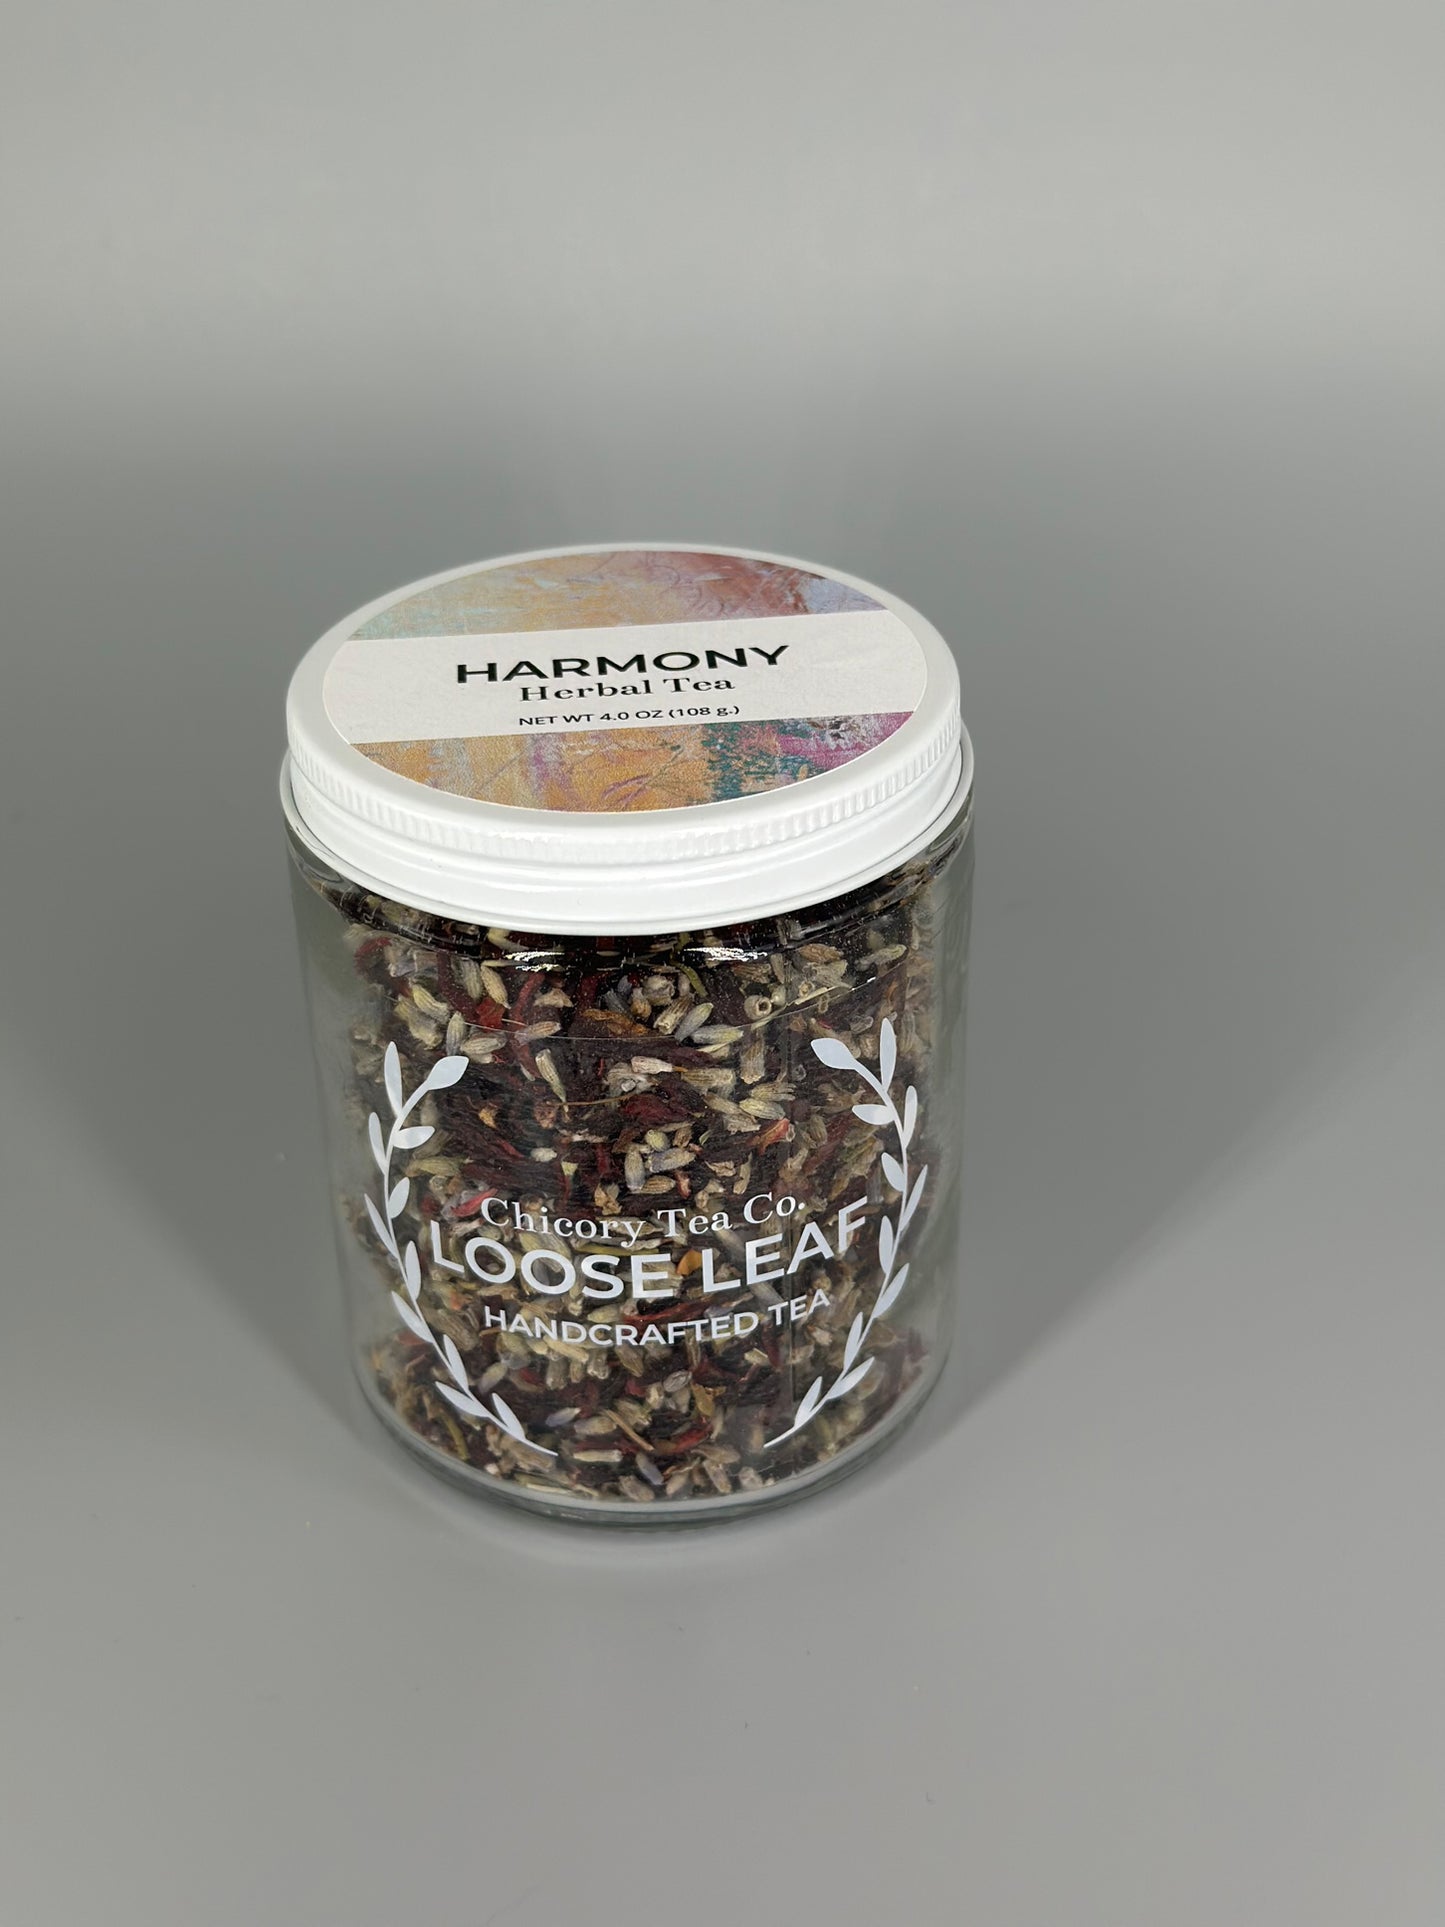 Chicory Tea Co.'s Harmony Herbal Tea in the jar, view from the front